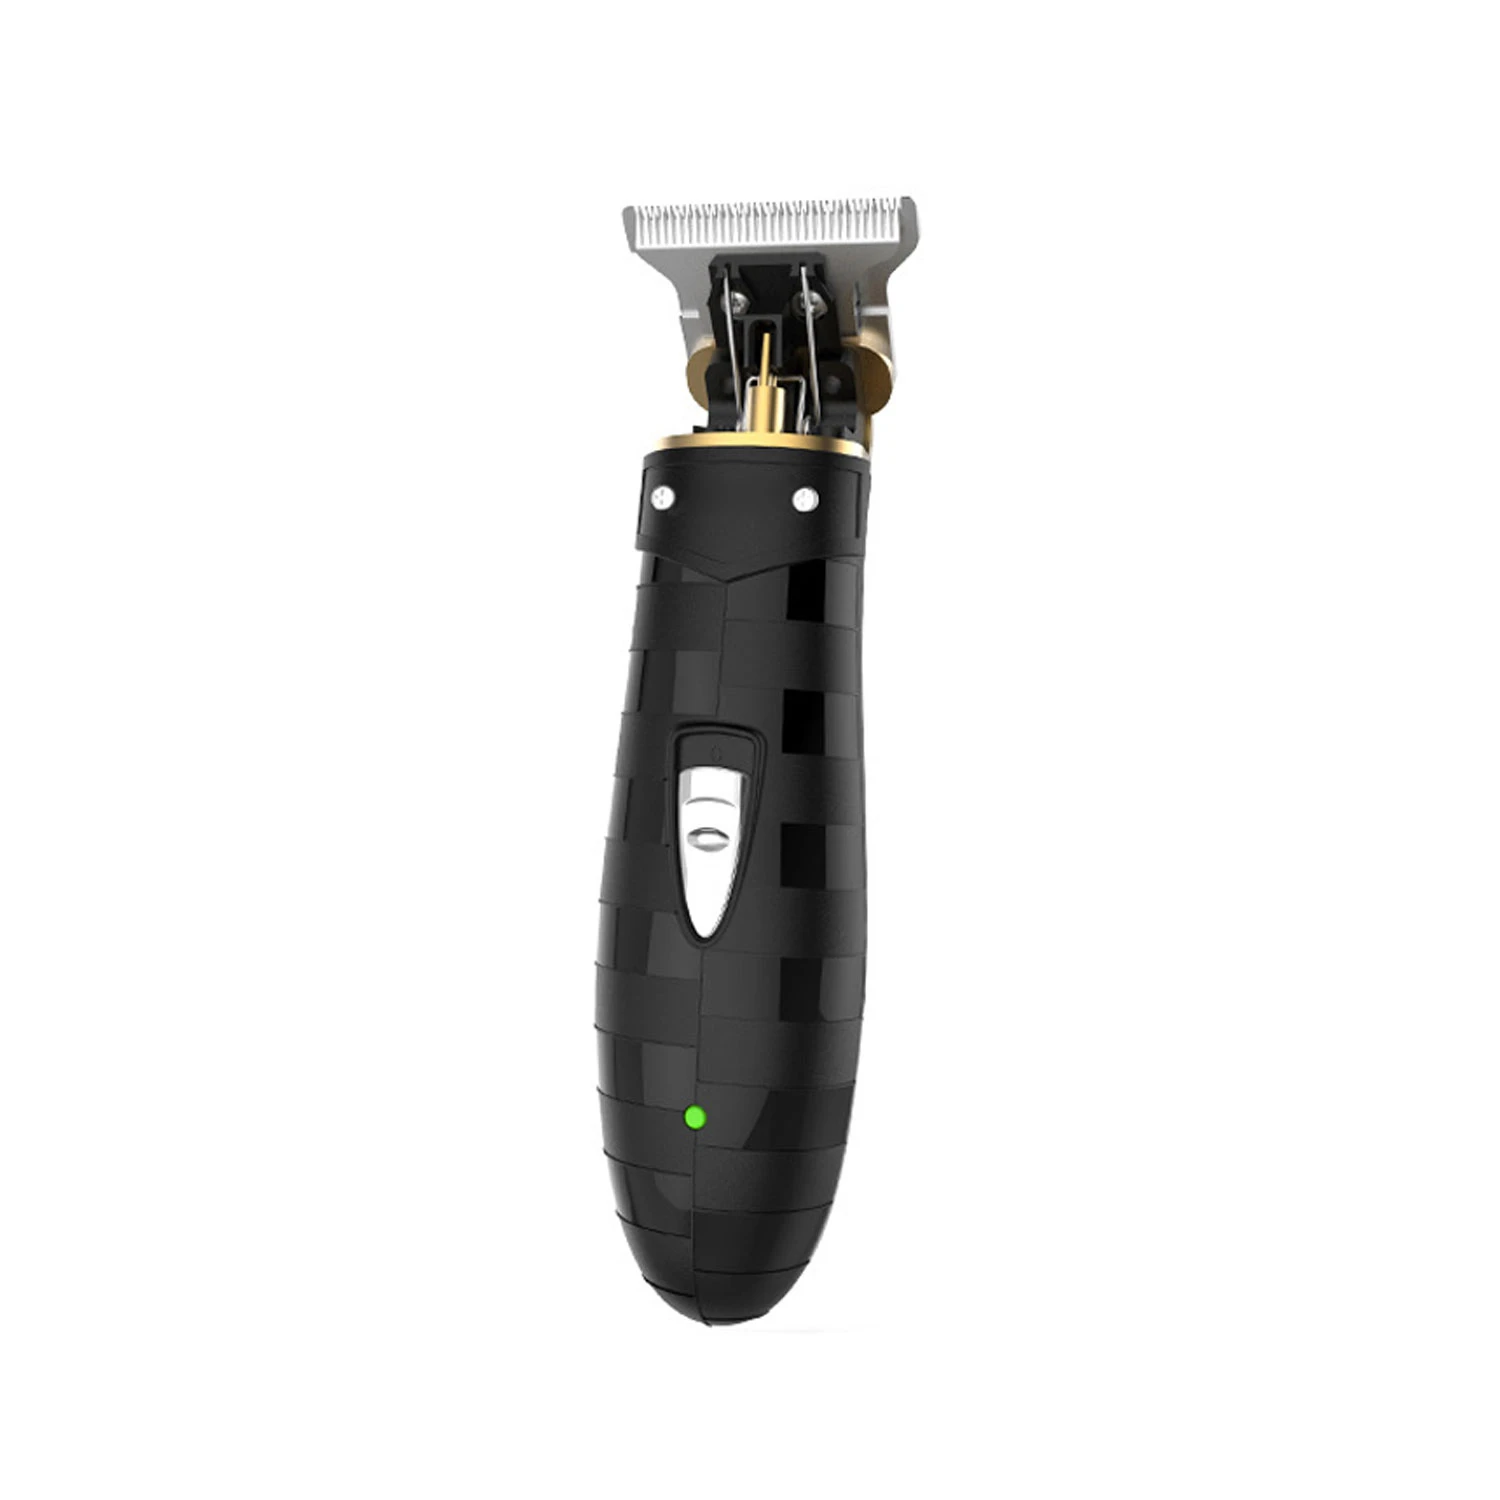 NEW Zero Adjustable Hair Cutting Machine Head Out Professional Hair Trimmer Hair Clippers